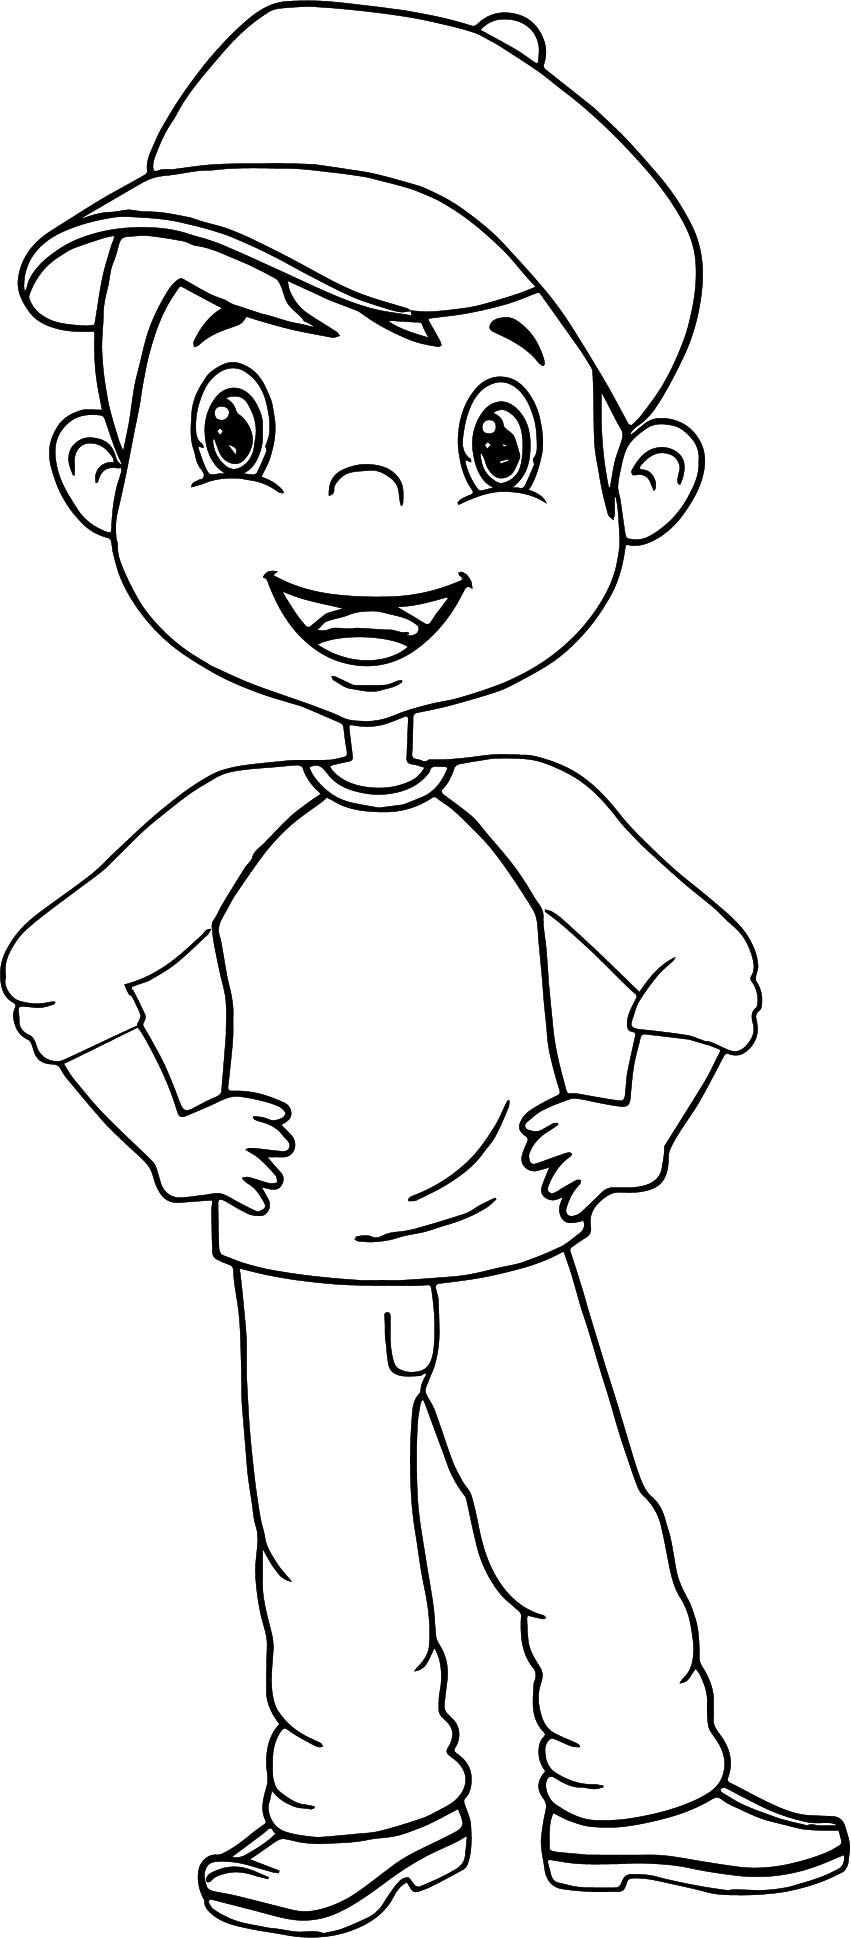 Coloring Pages Of Boys
 Cartoon Boy With Hat Coloring Page